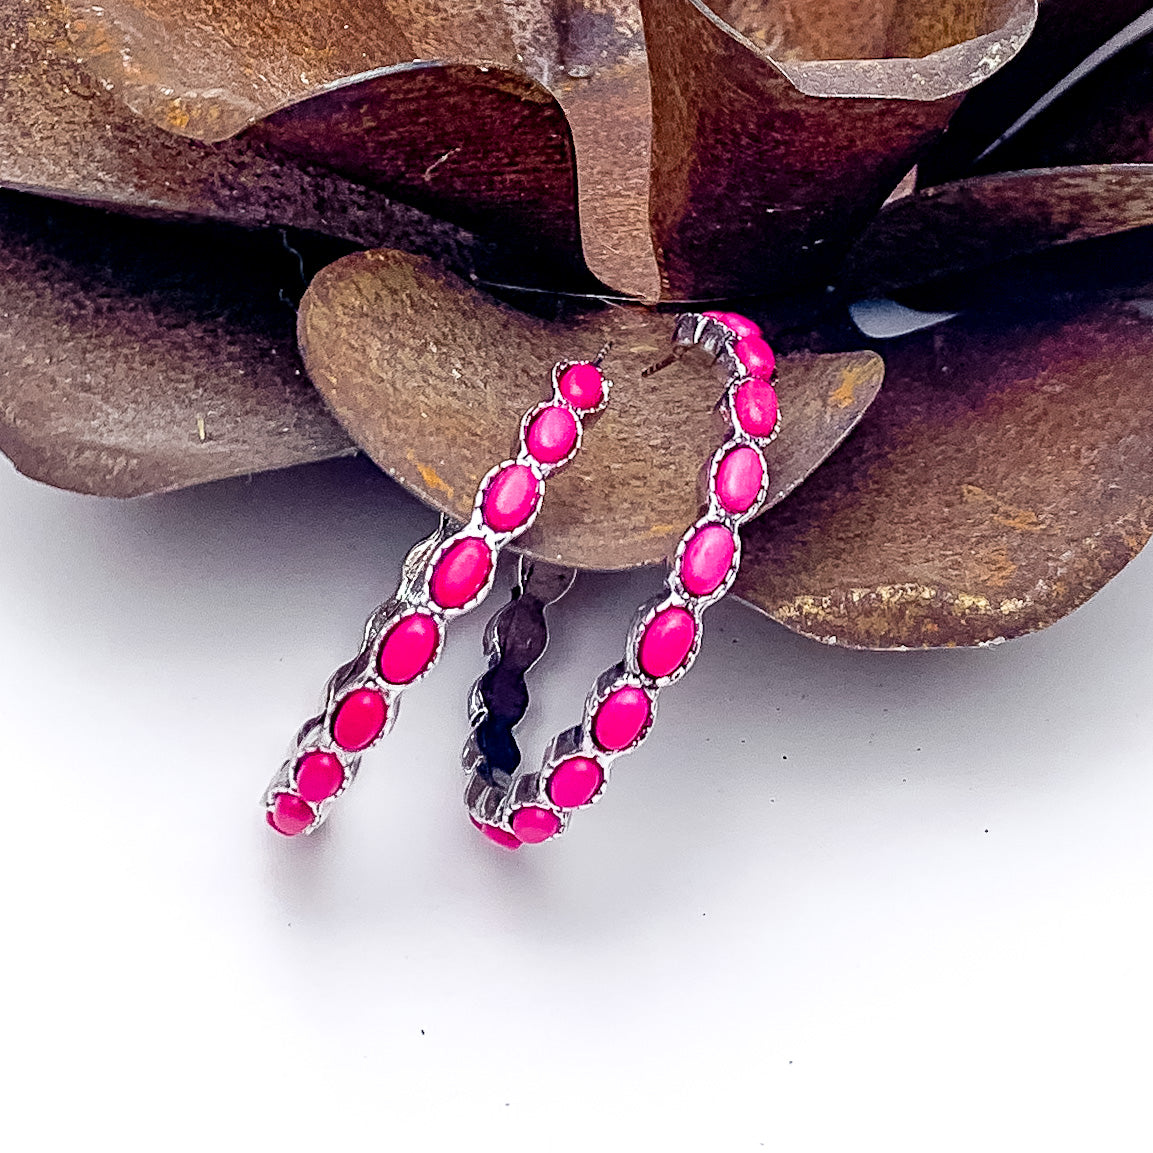 Silver Hoop Earrings with Fuchsia Stones. Pictured on a white background with the earrings against a rustic rose.